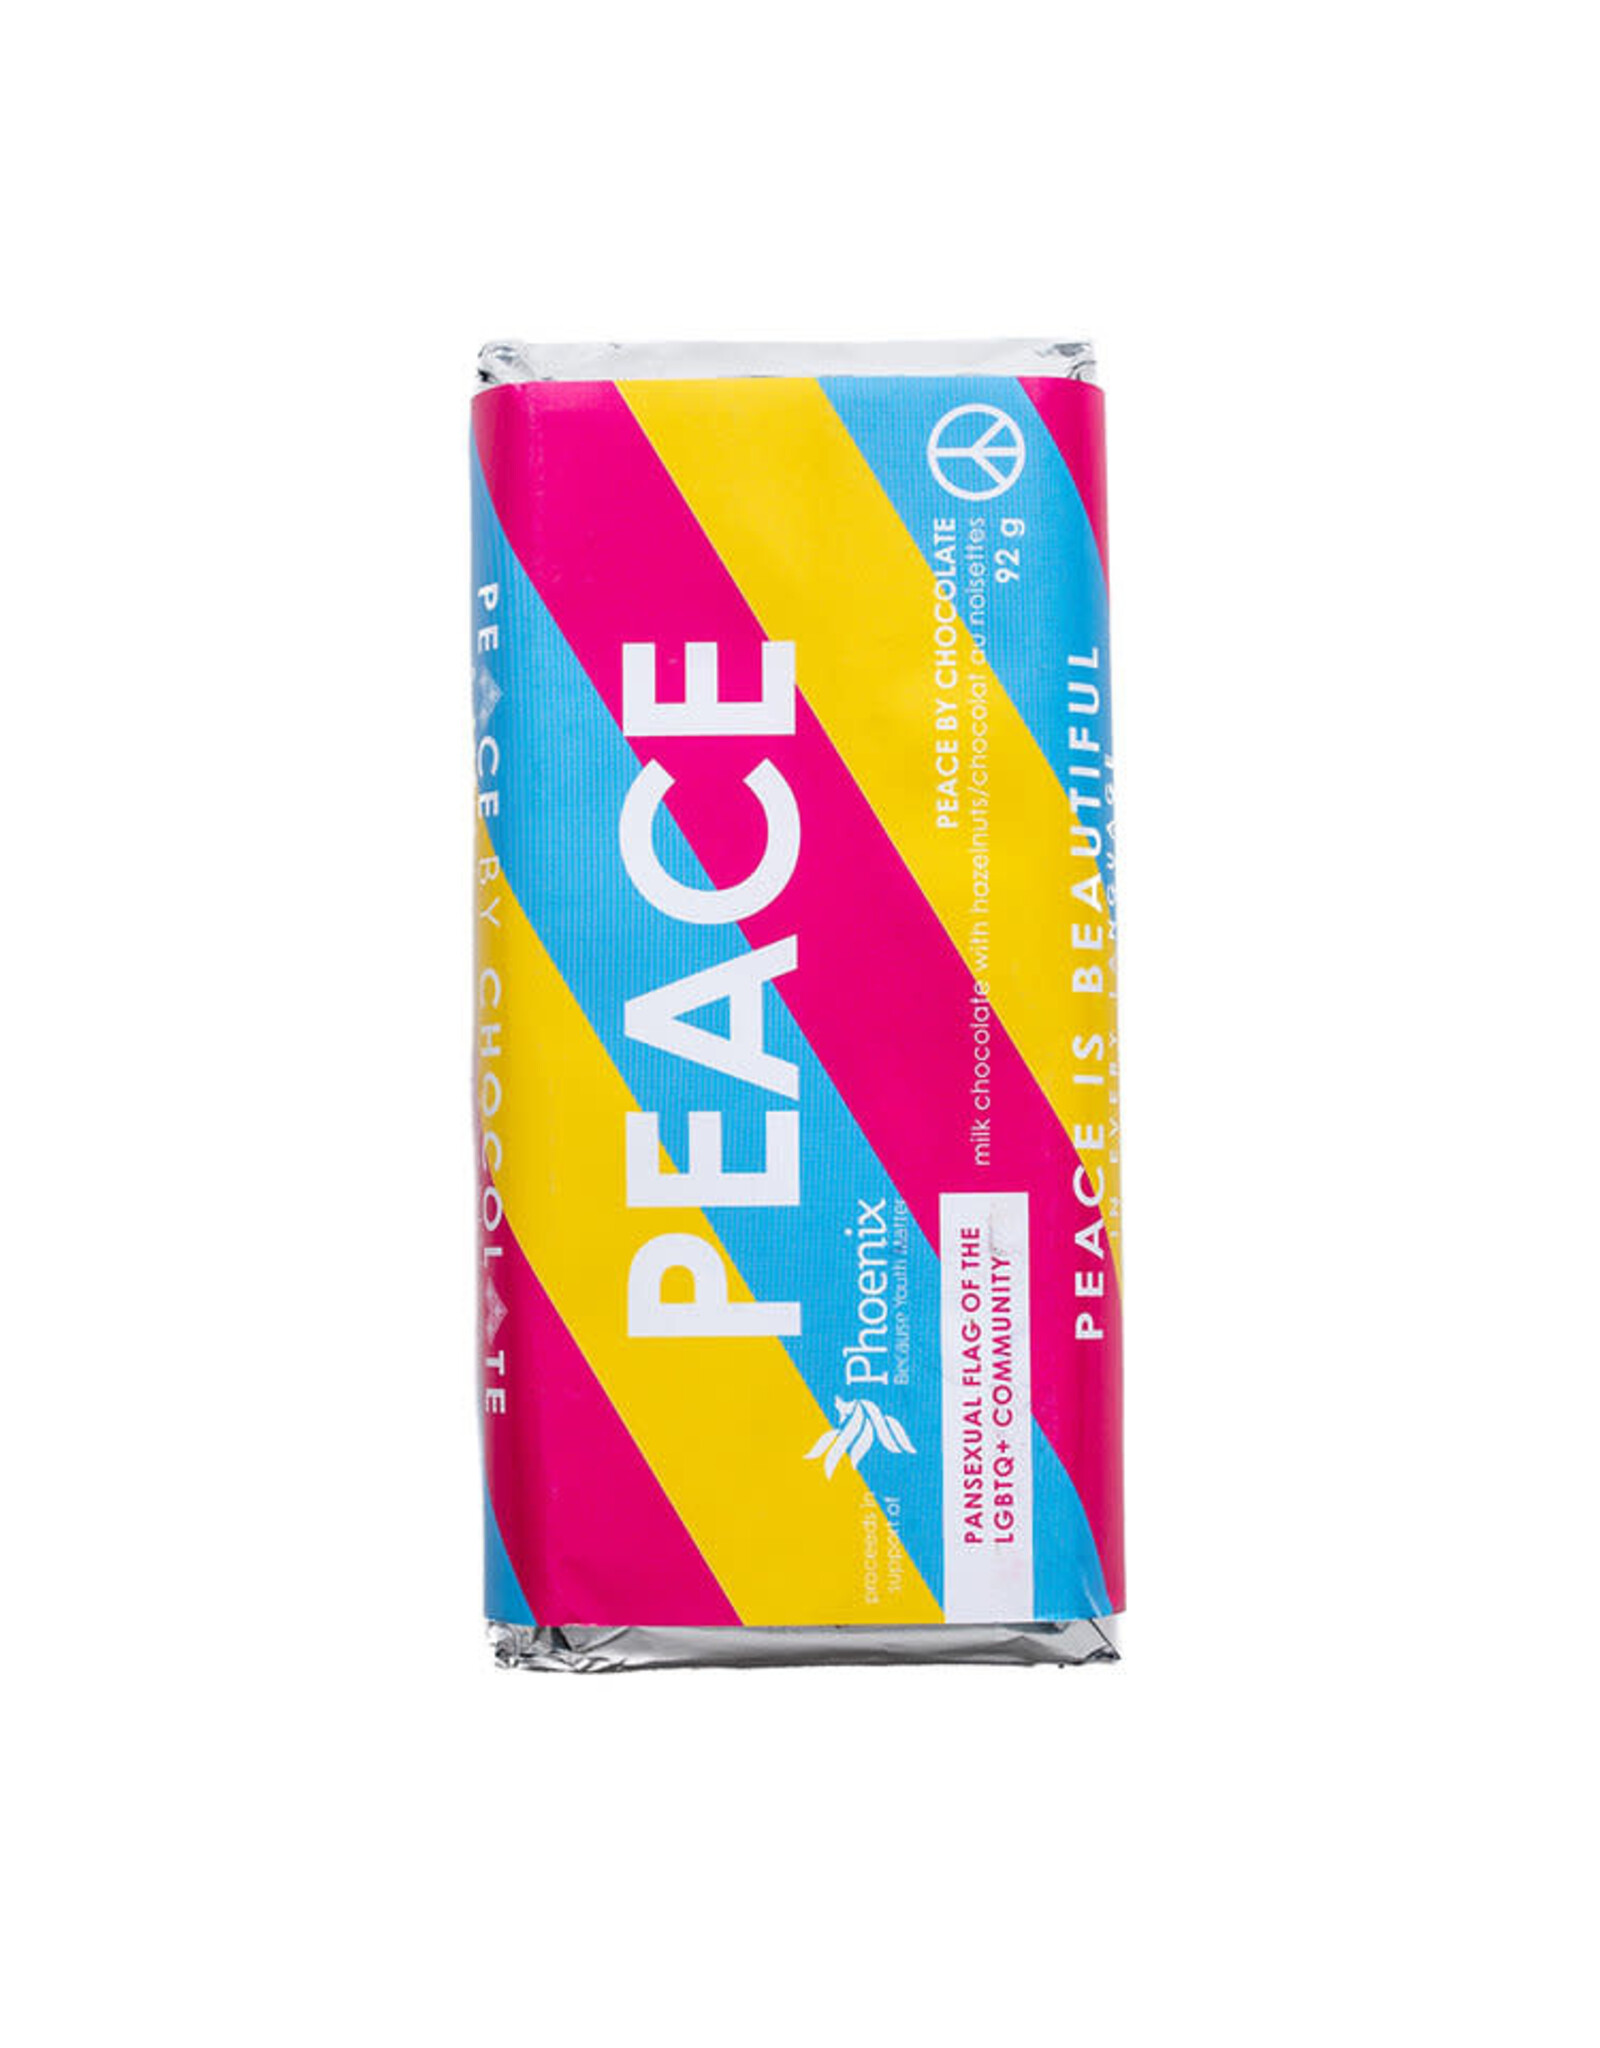 Peace By Chocolate - Pride Bar, 92g